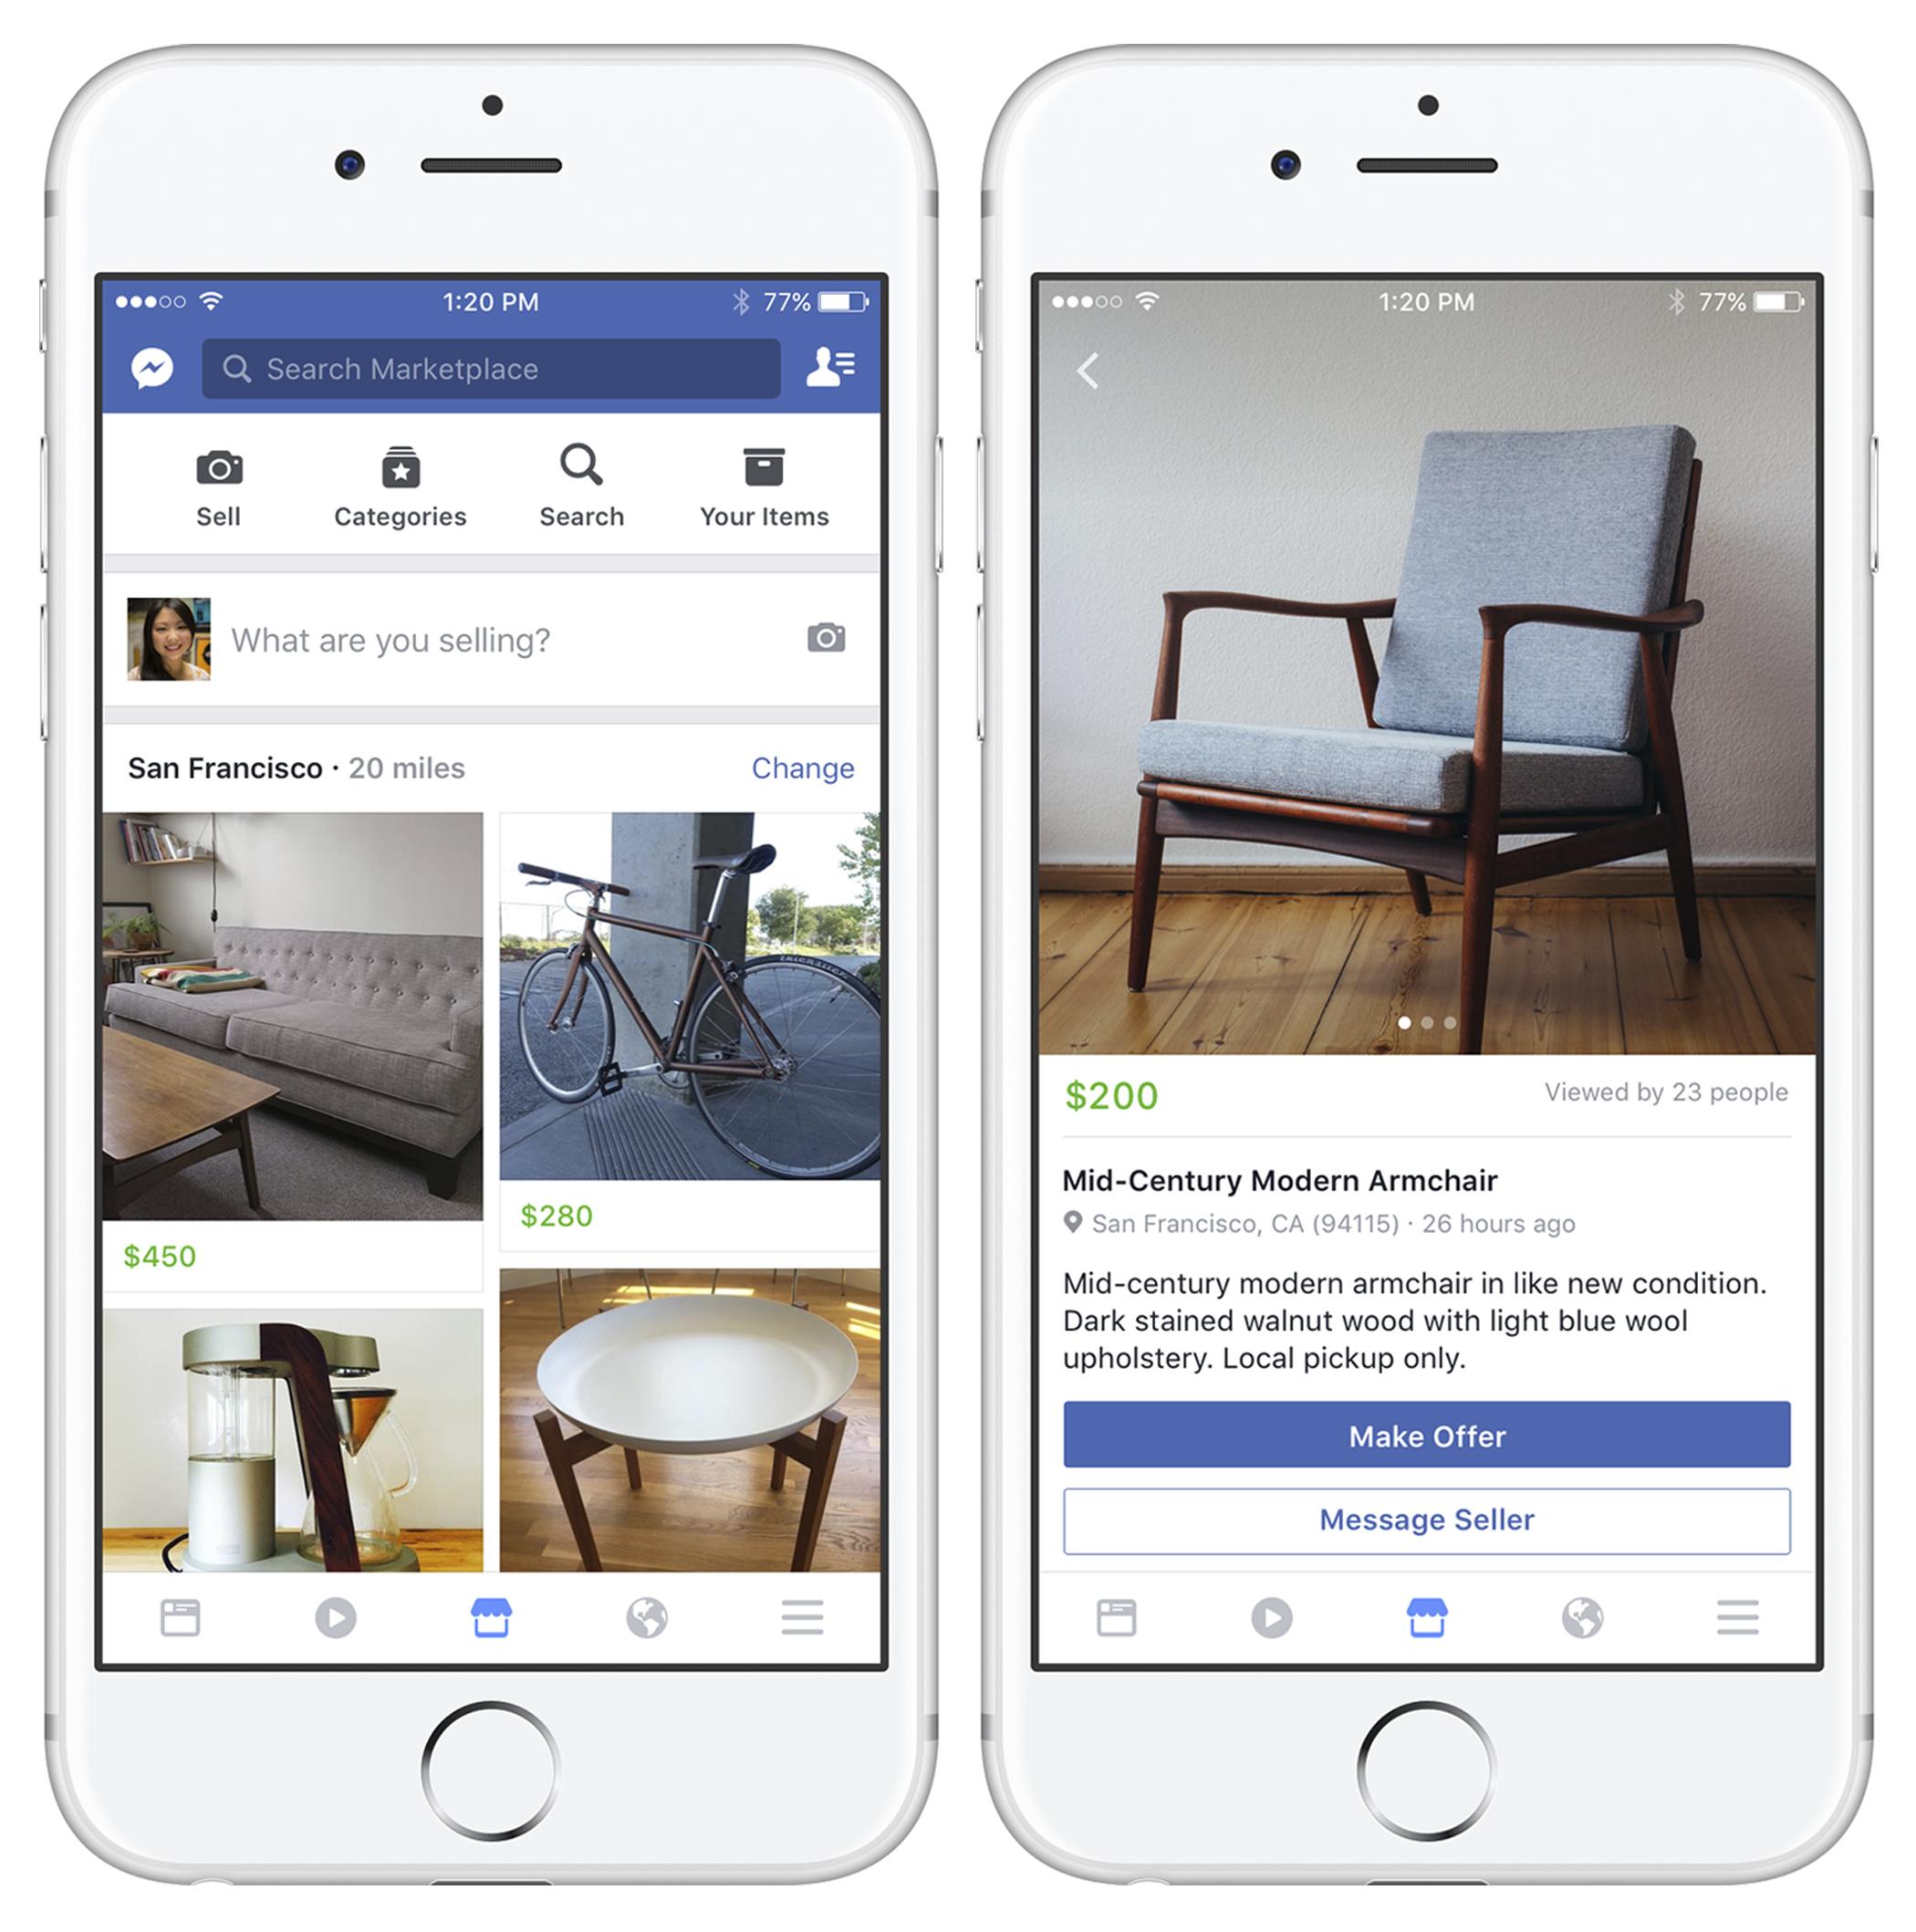 Facebook Takes On Ebay And Craigslist With Marketplace Feature